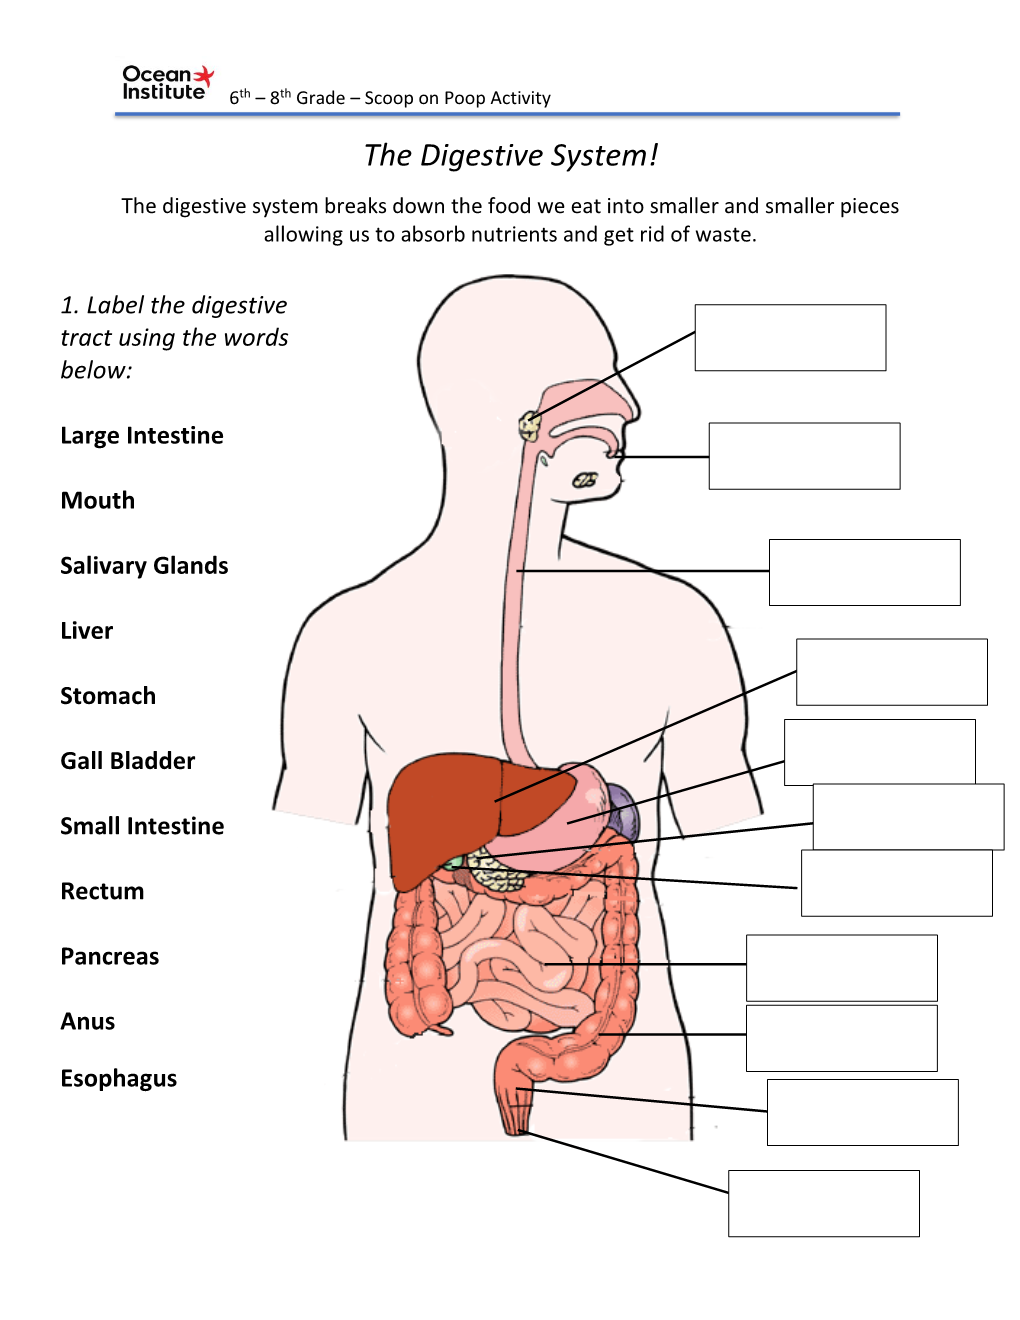 The Digestive System!